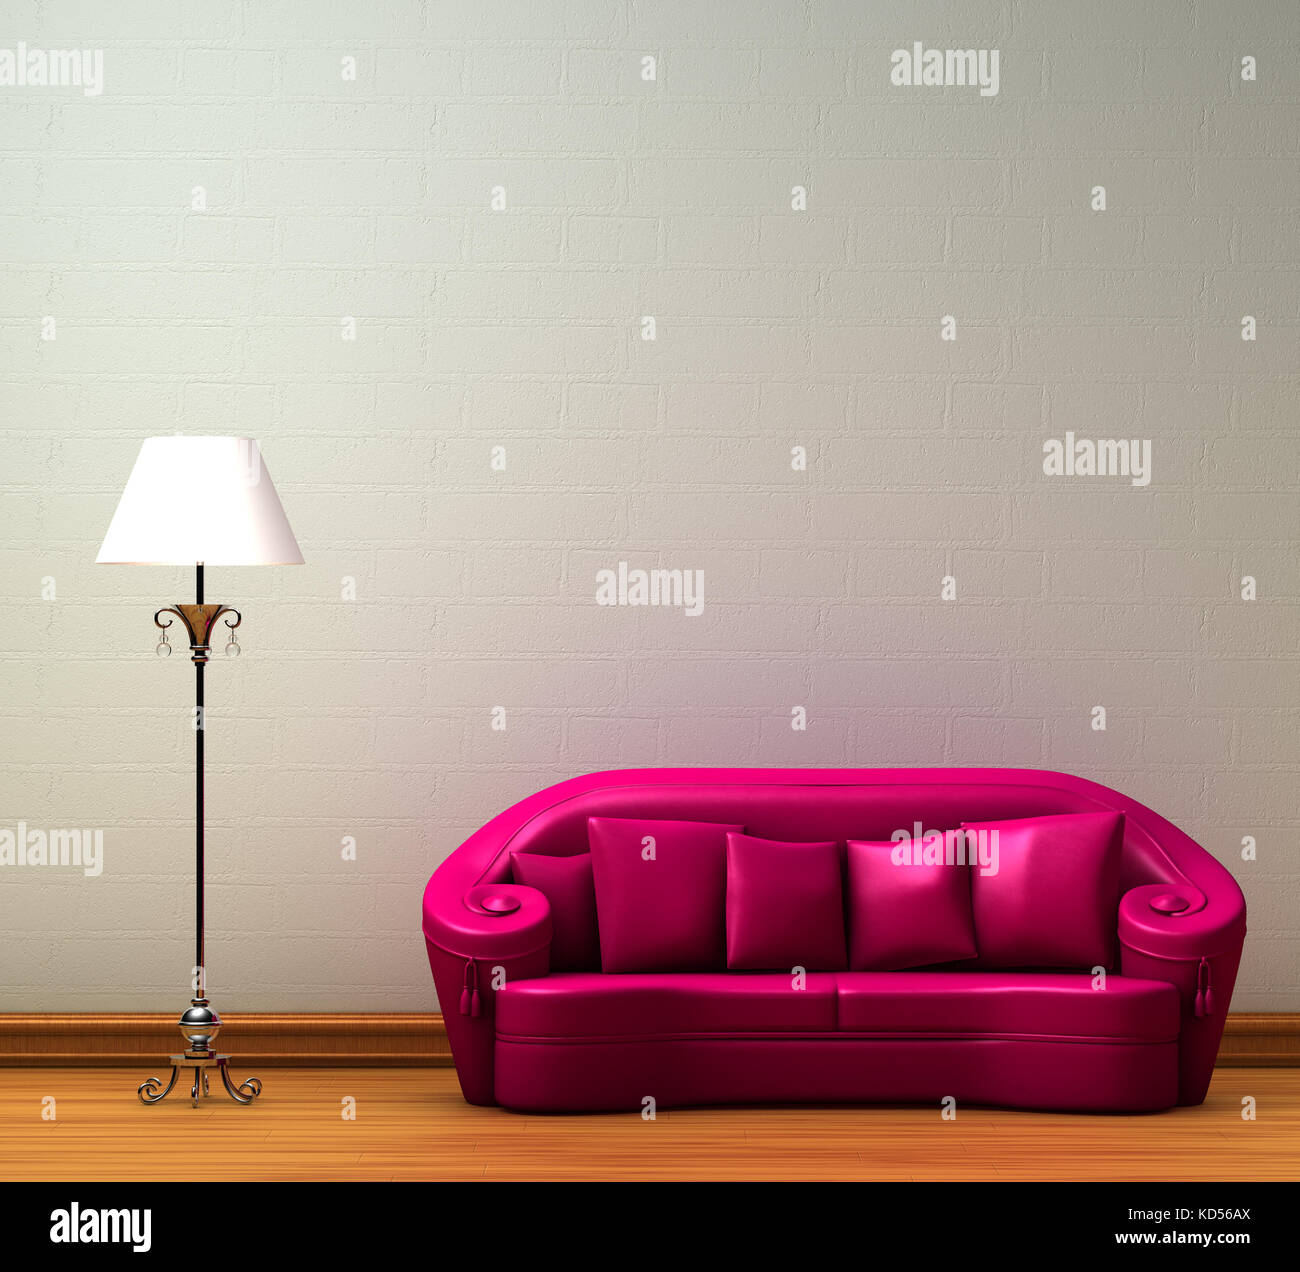 Pink couch with standard lamp in minimalist interior Stock Photo